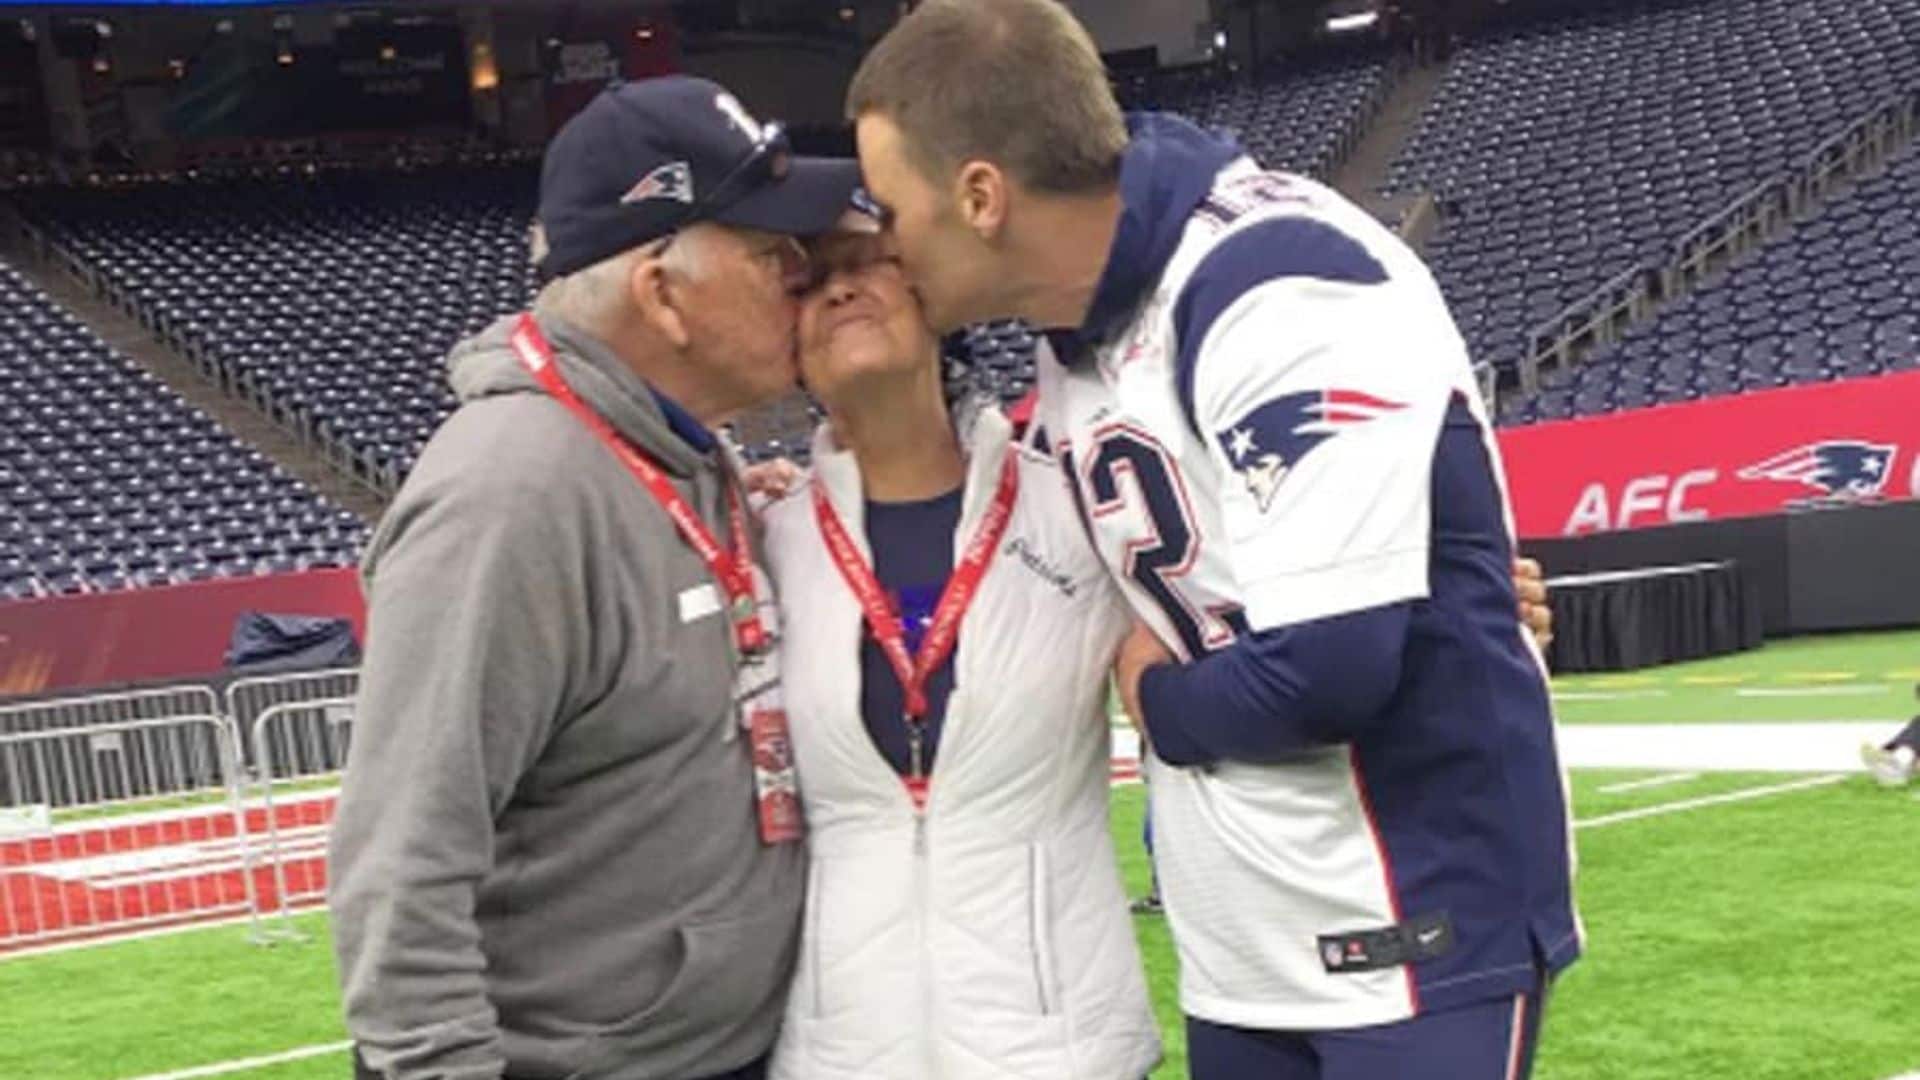 Tom Brady wins Super Bowl for mom battling cancer: 'She’s the one I want to win it for'